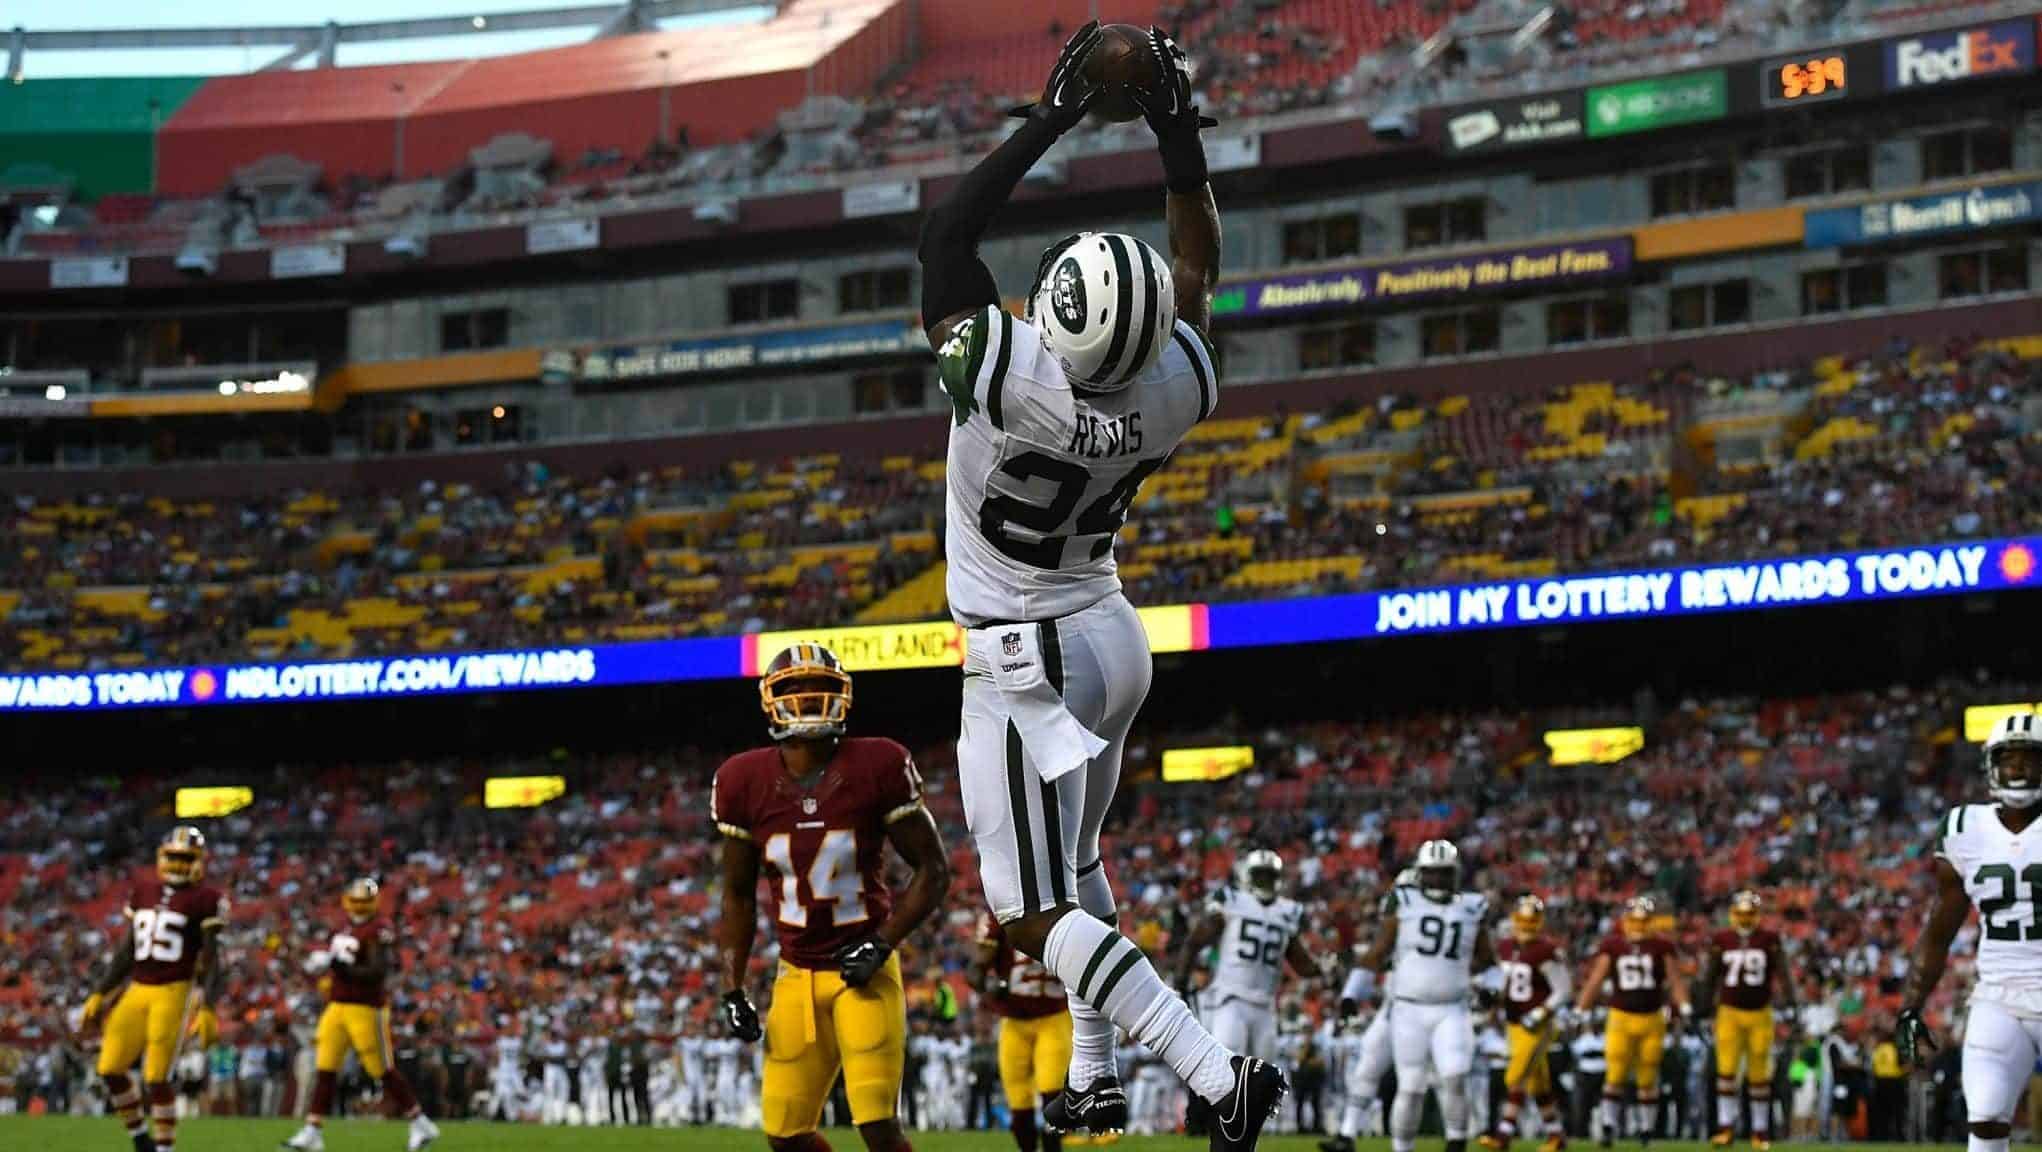 LANDOVER, MD - AUGUST 19: Cornerback Darrelle Revis #24 of the New York Jets makes a first half interception against the Washington Redskinsat at FedExField on August 19, 2016 in Landover, Maryland.